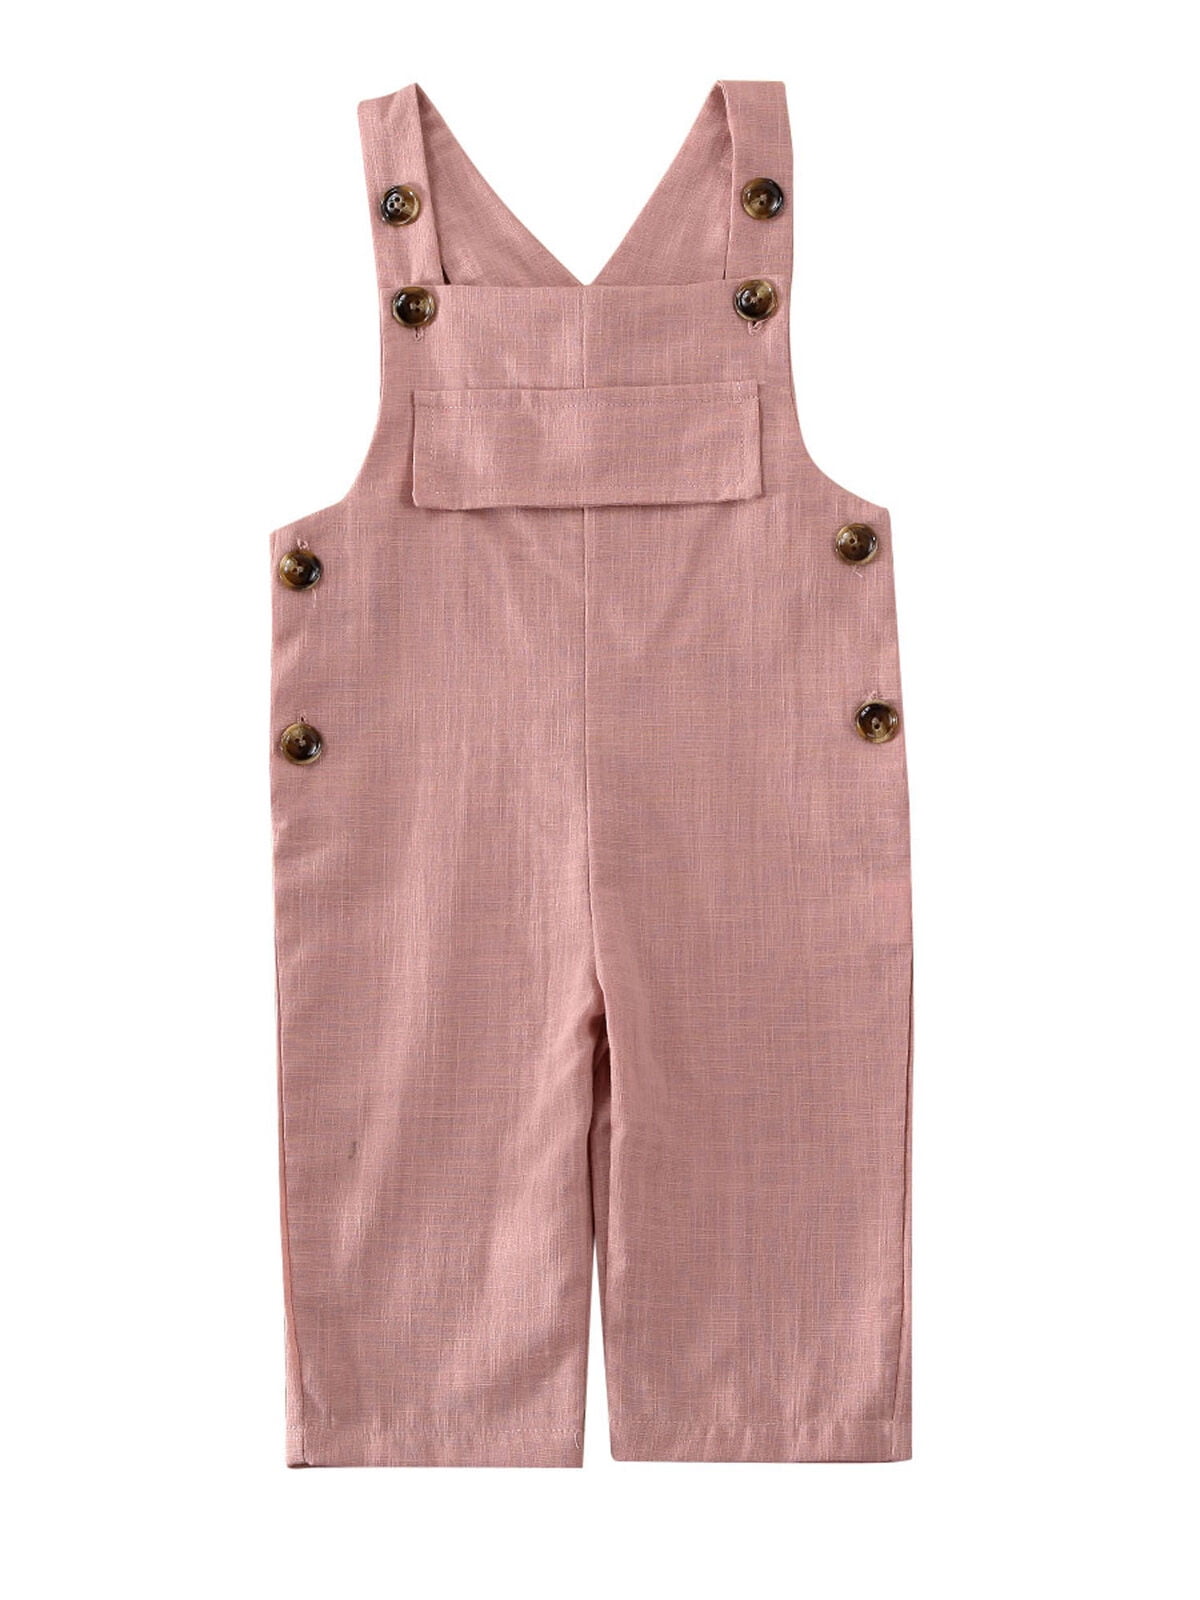 Toddler Infant Baby Boys Girls Overall Adjustable Solid Open Legs Chest High Snow Bib Overalls Suspender Jeans Pants